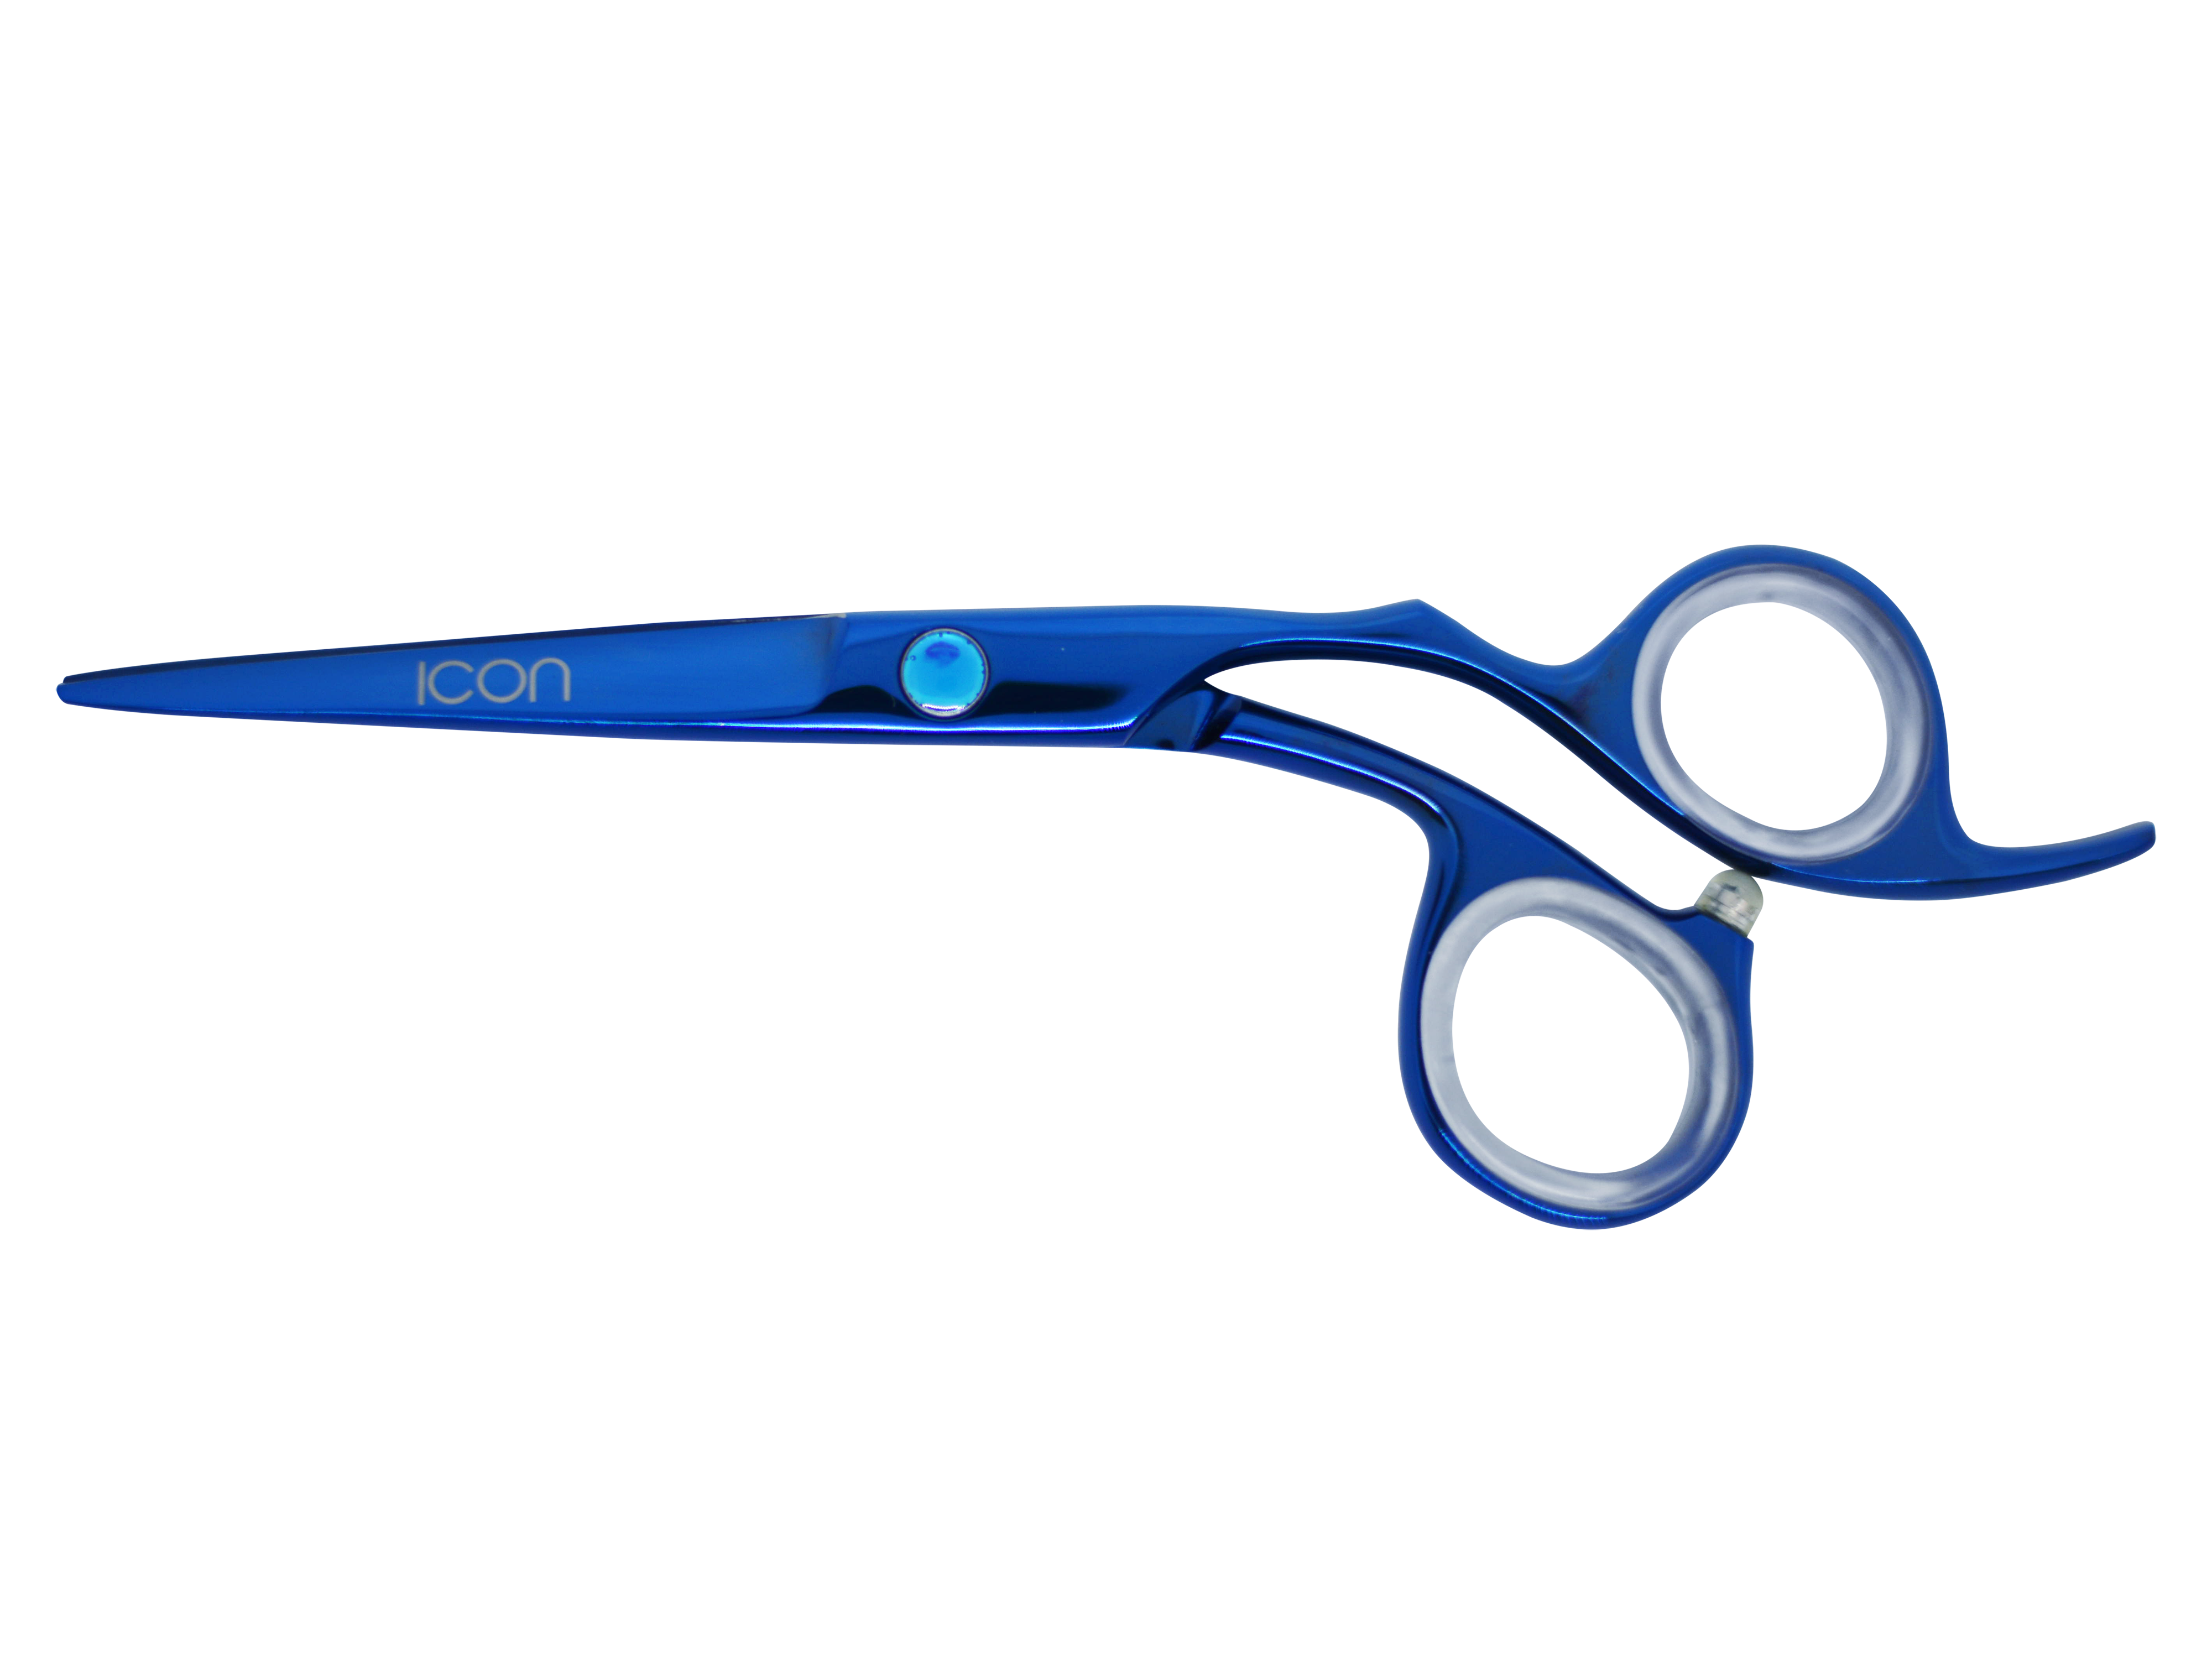 Shears clipart old school barber. Products icon blue crane